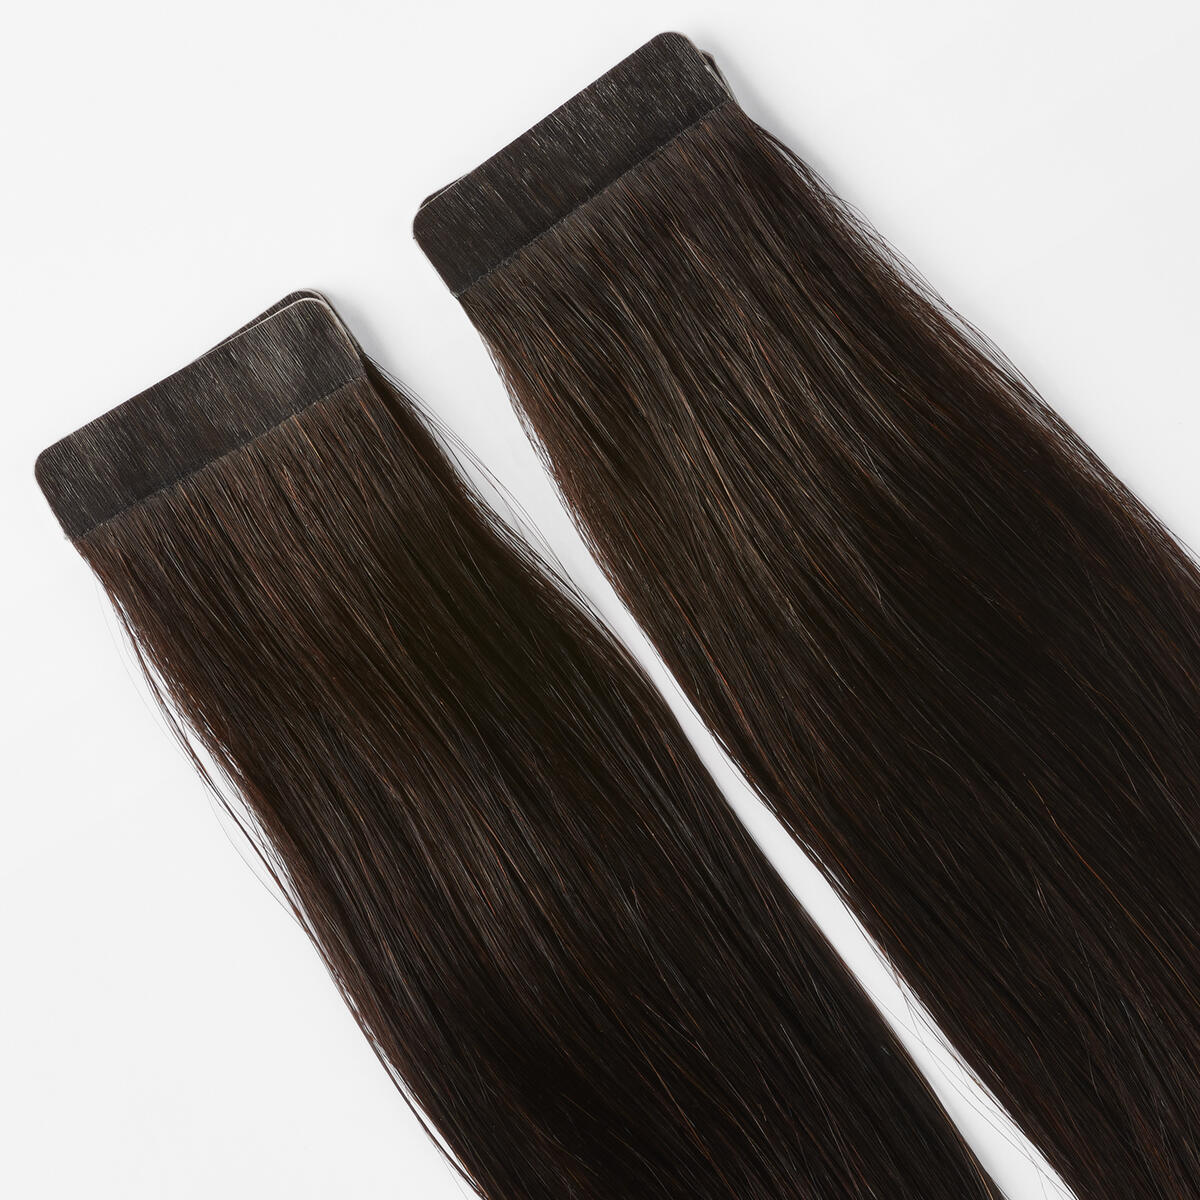 Basic Tape Extensions Classic 4 1.2 Black Brown 60 cm